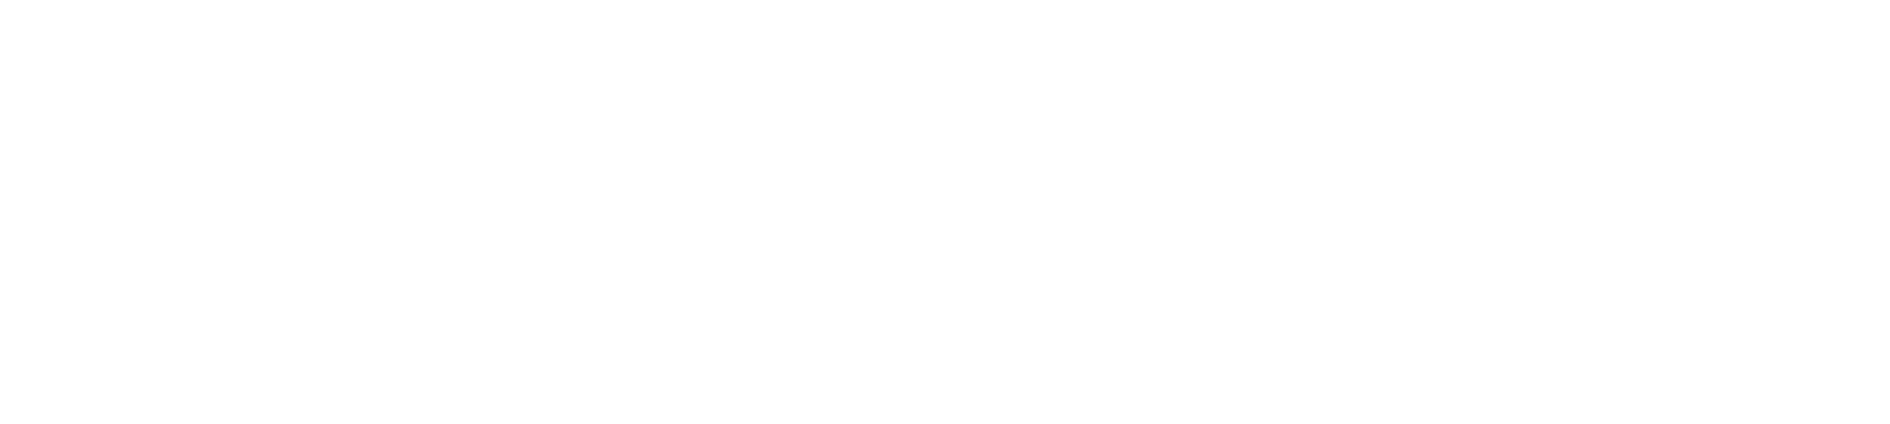 Filmbutik logo on the front page